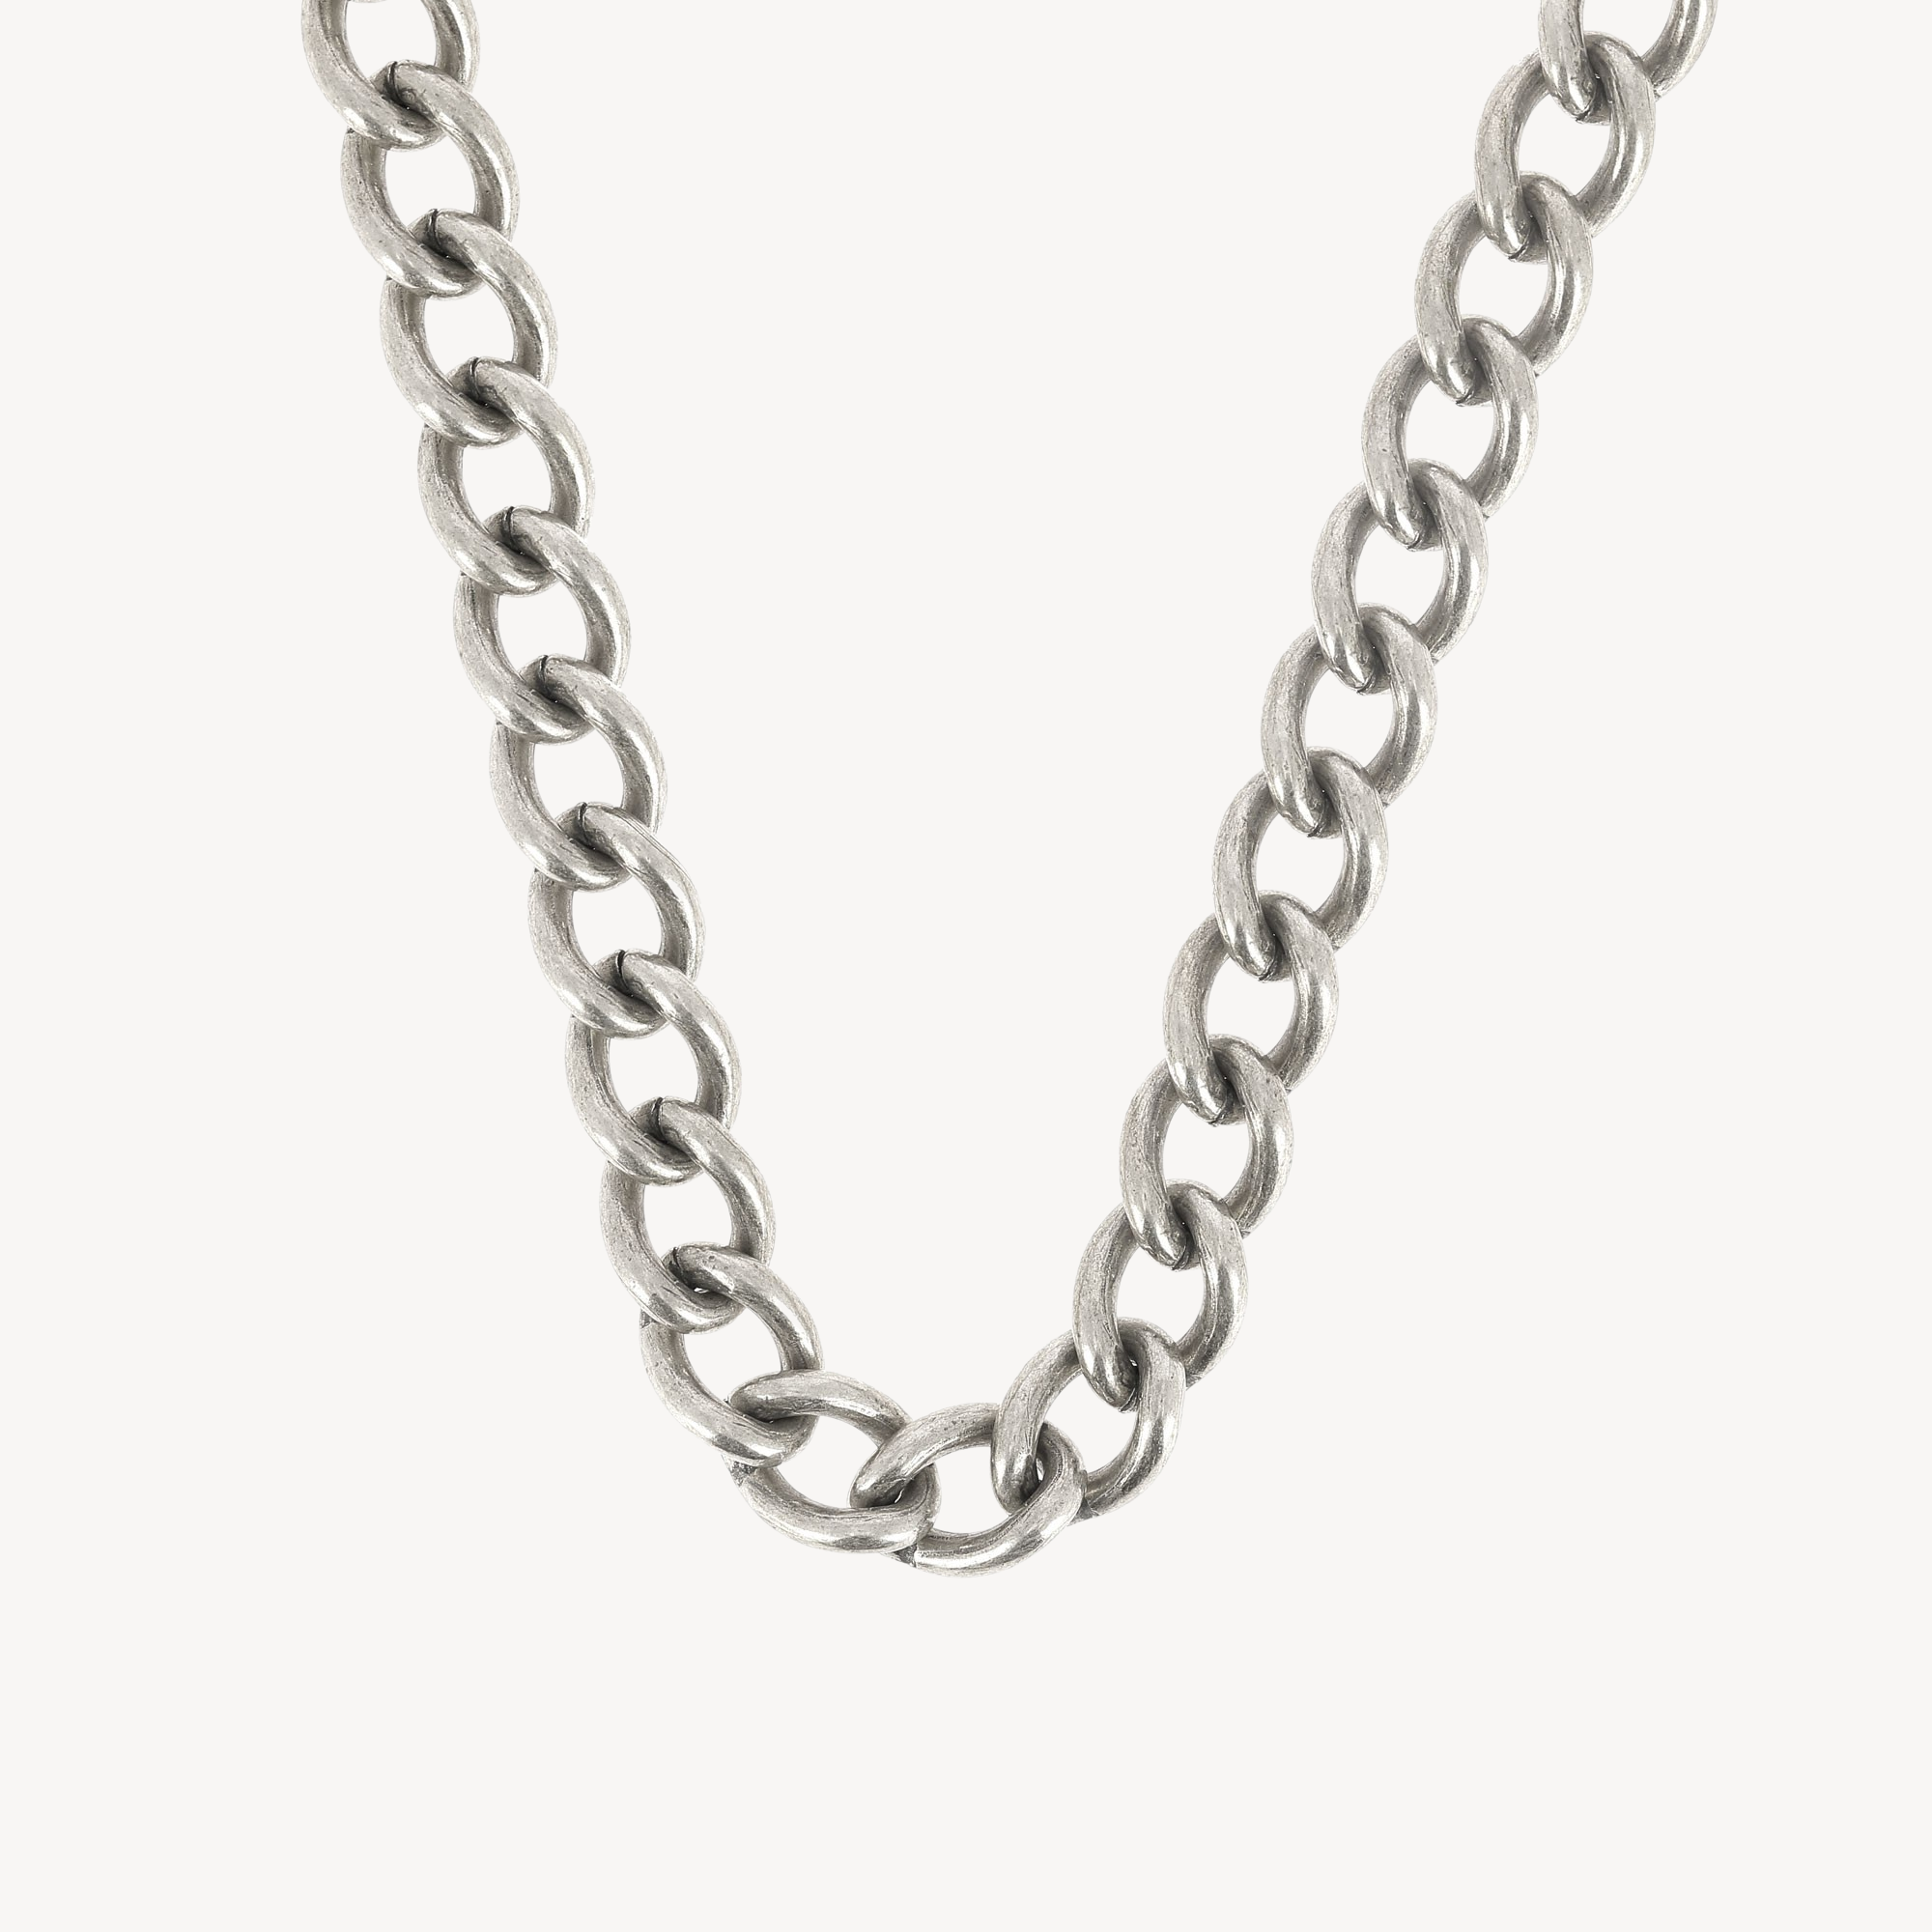 Rotten Chain Necklace